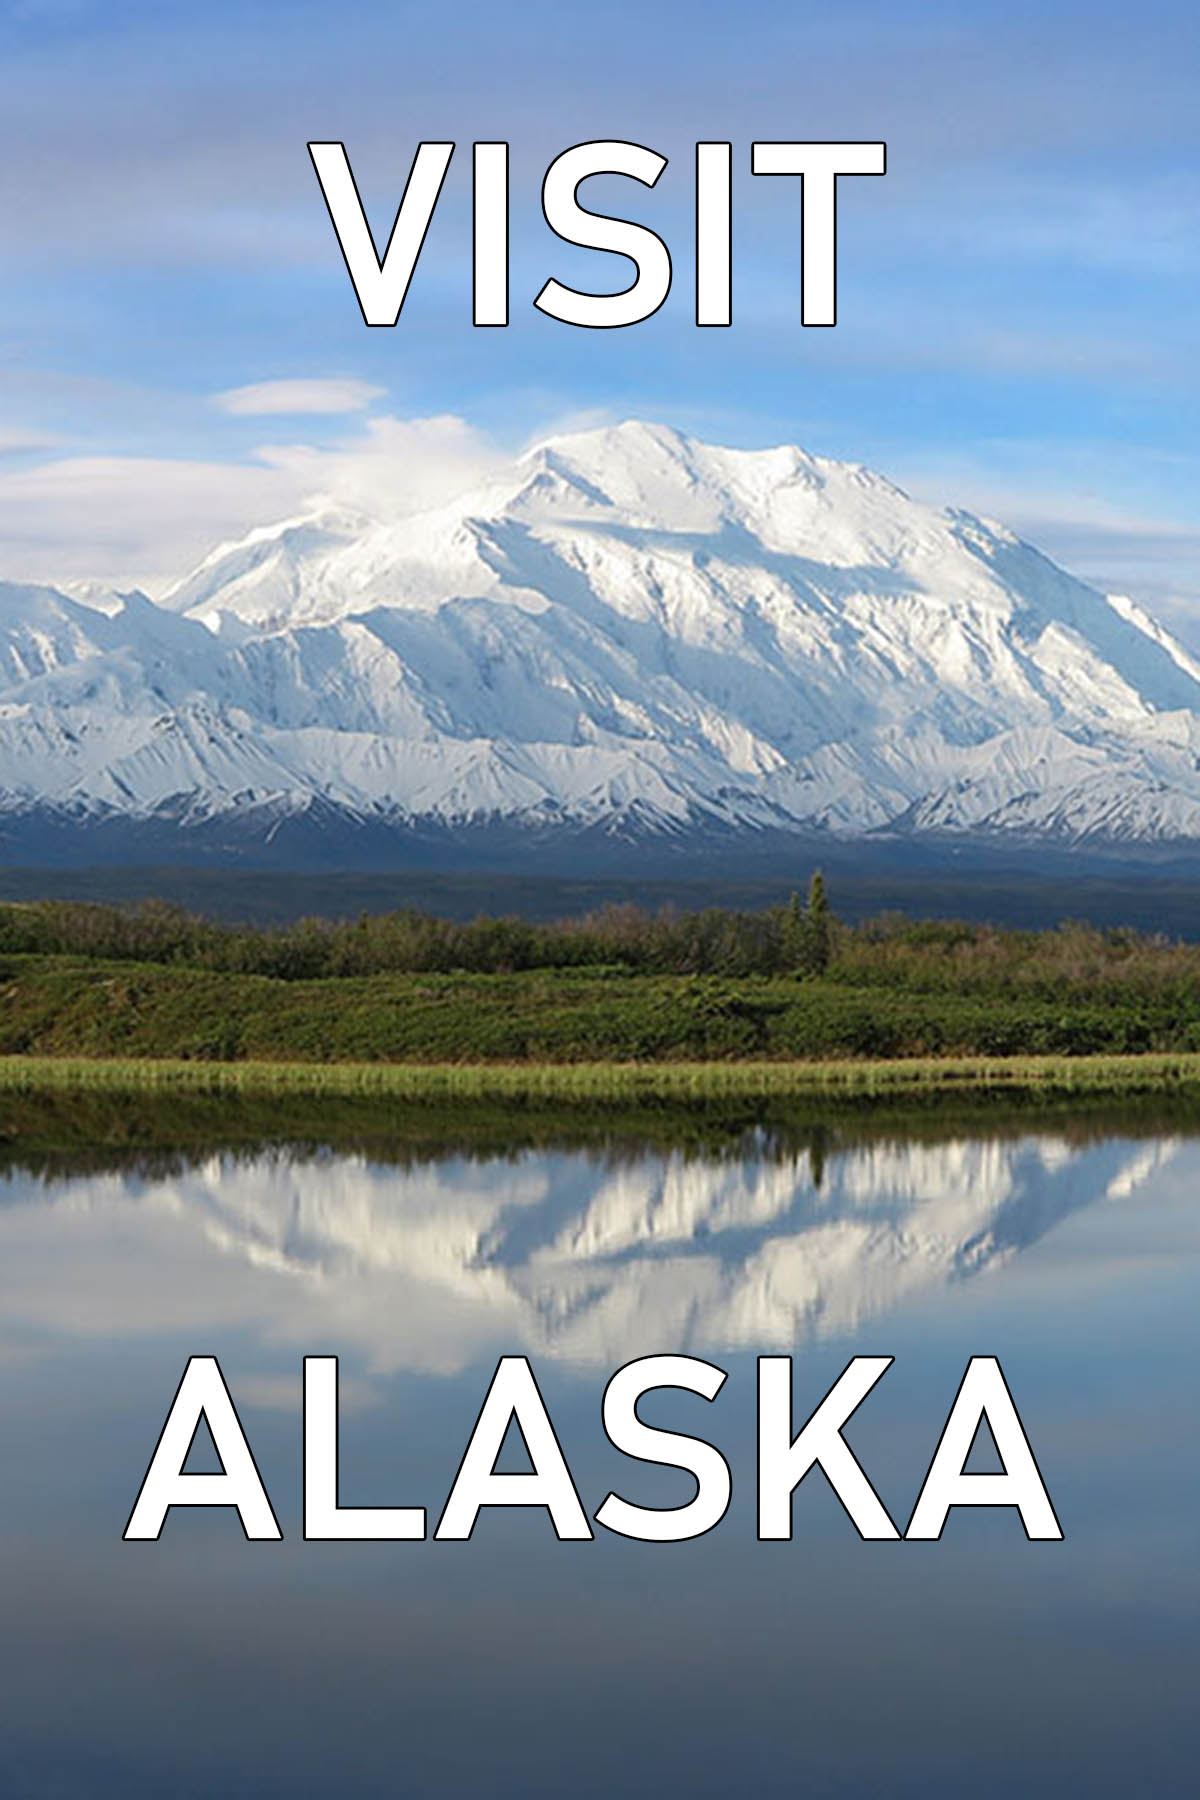 This is my own Alaska travel photography guide, along with an FAQ section that answers your questions about photographing Alaska